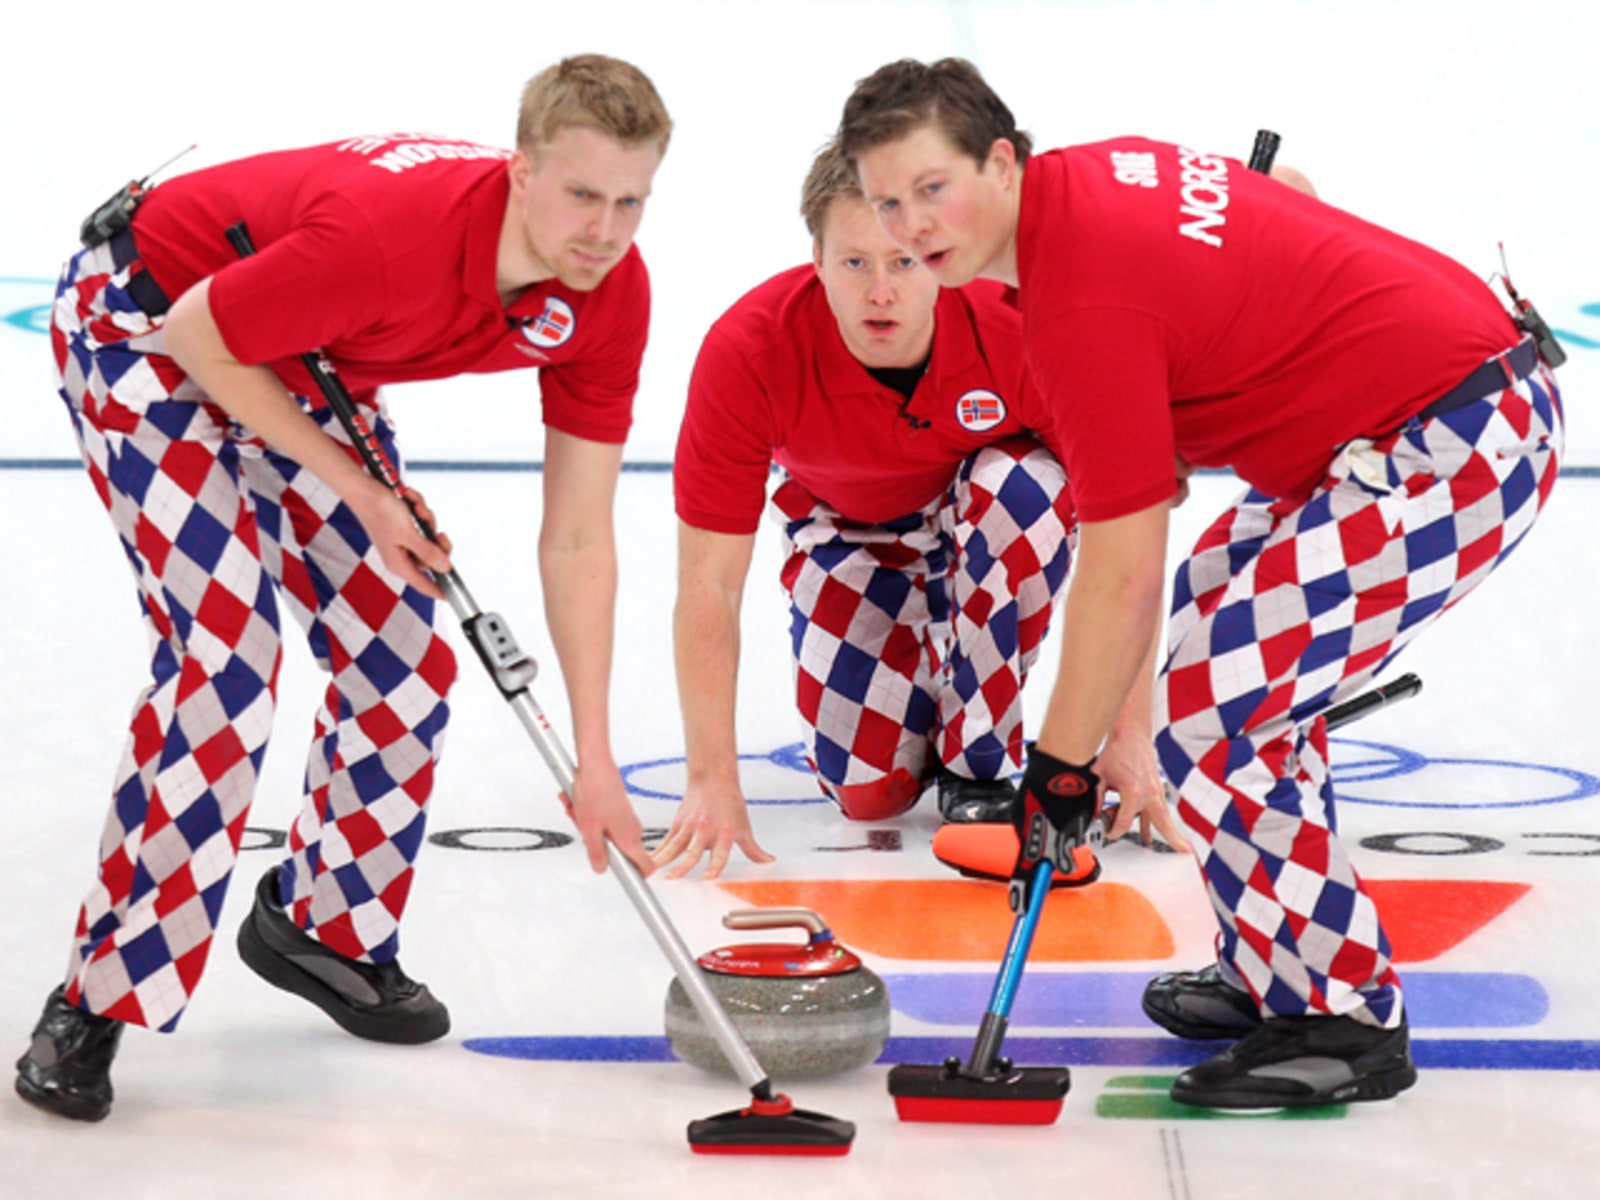 TODAY-Olympic-Costumes-norway-curling-tease.today-ss-slide-desktop.jpg